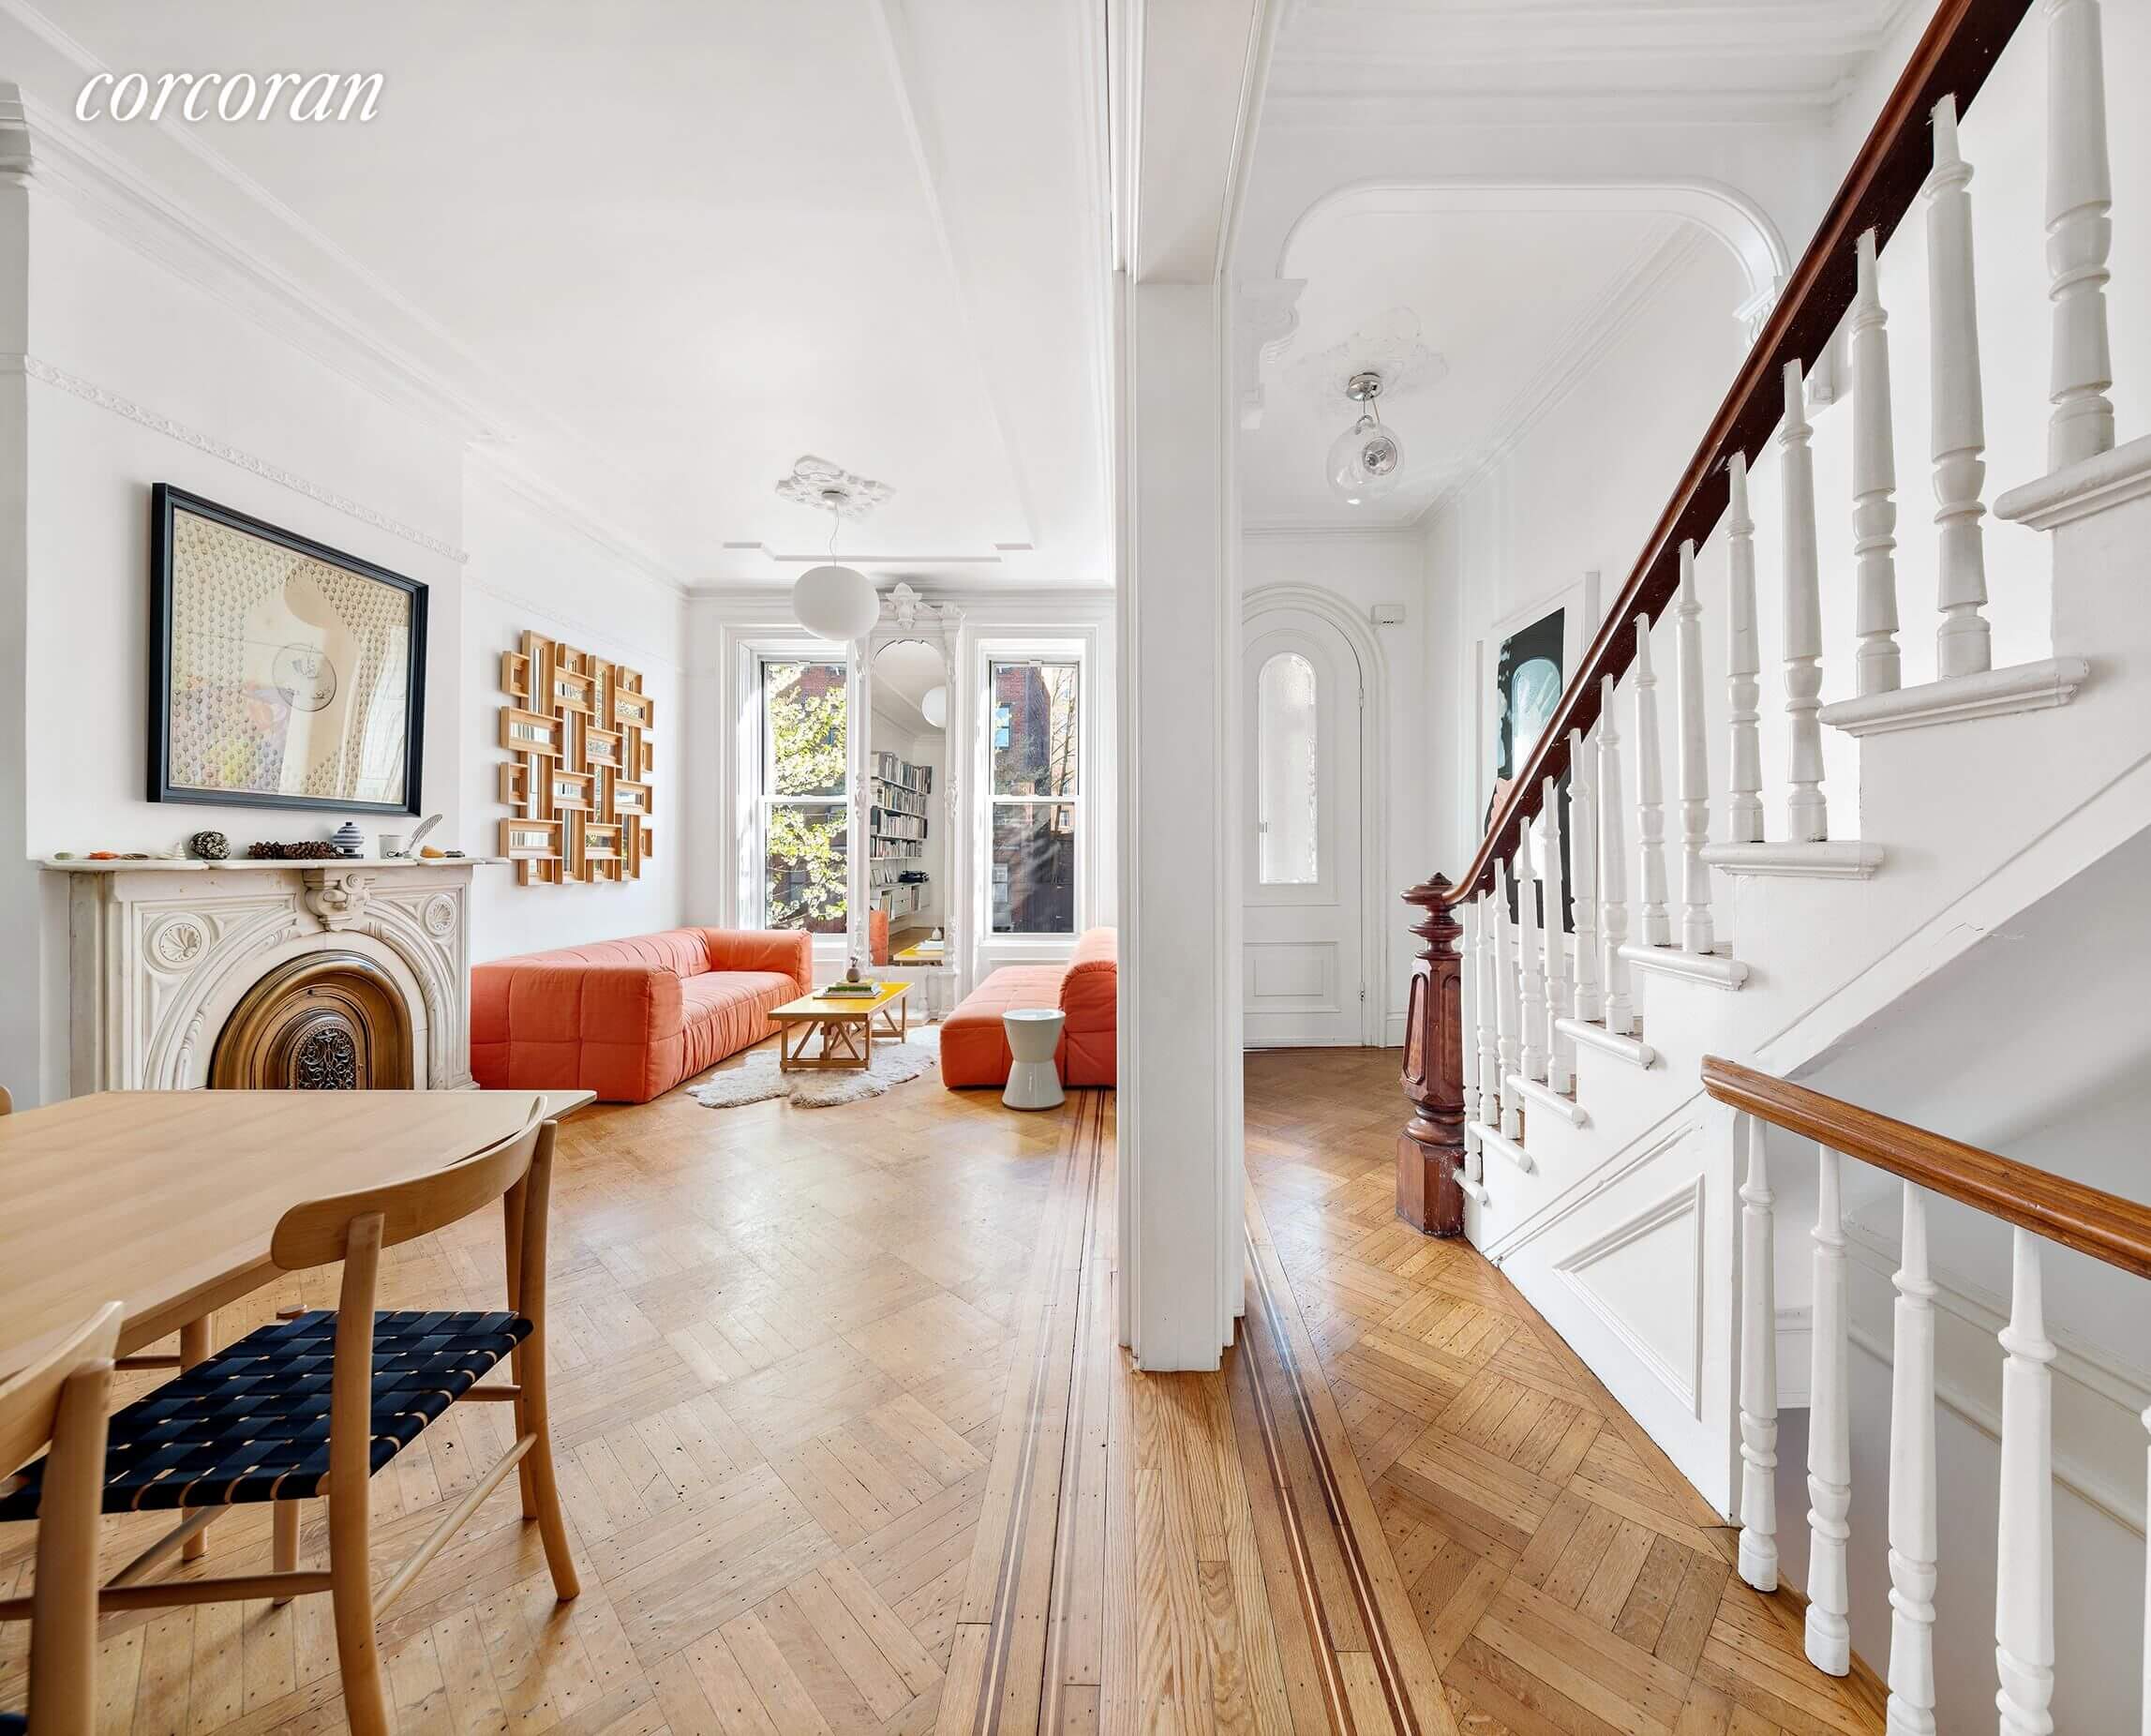 A Bay Ridge Row Dwelling and 3 Much more to See, Setting up at $1.295 Million